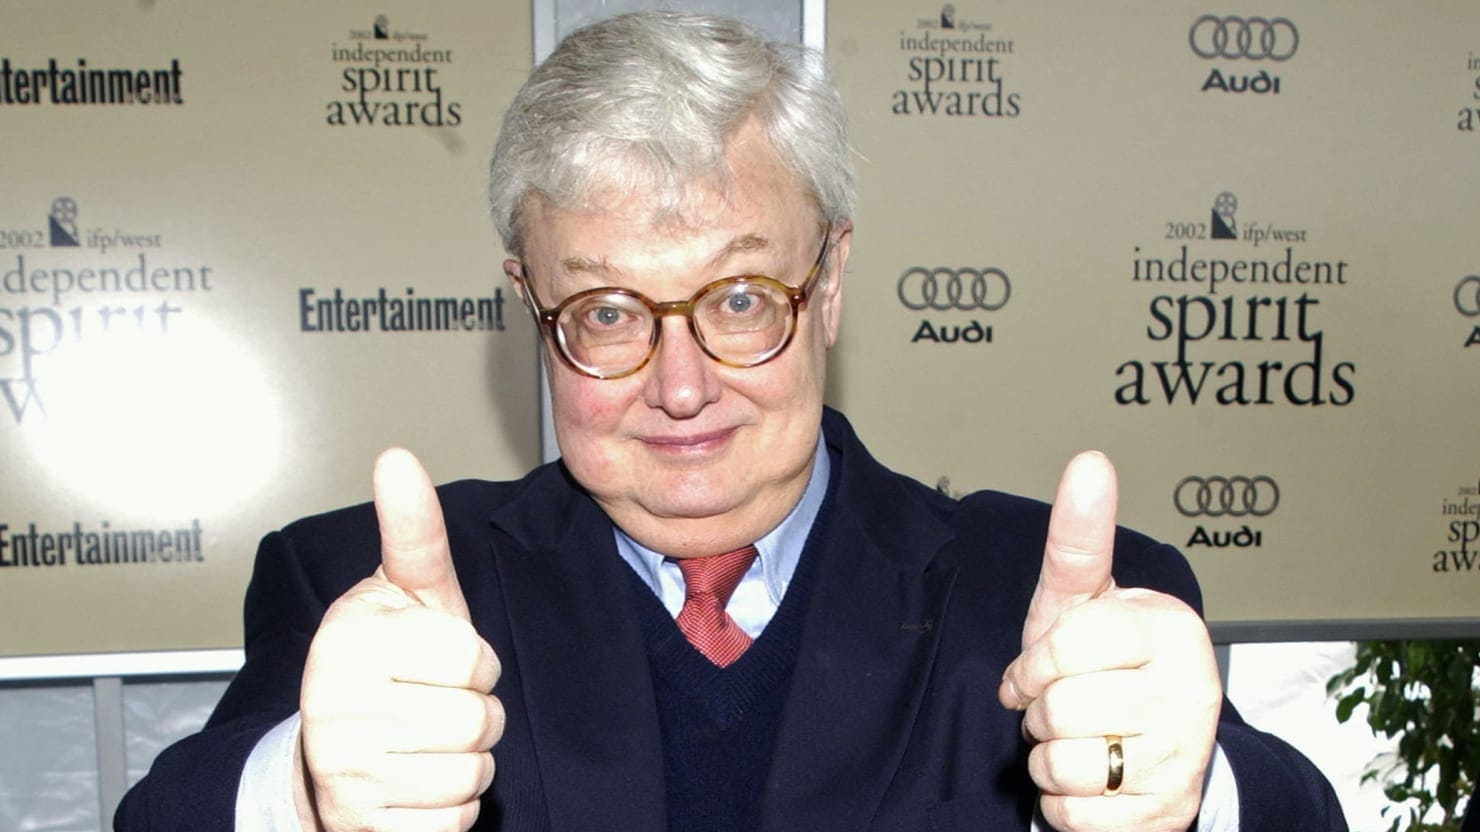 ICC #87 – This is Roger Ebert’s Happening and It Freaks Him Out